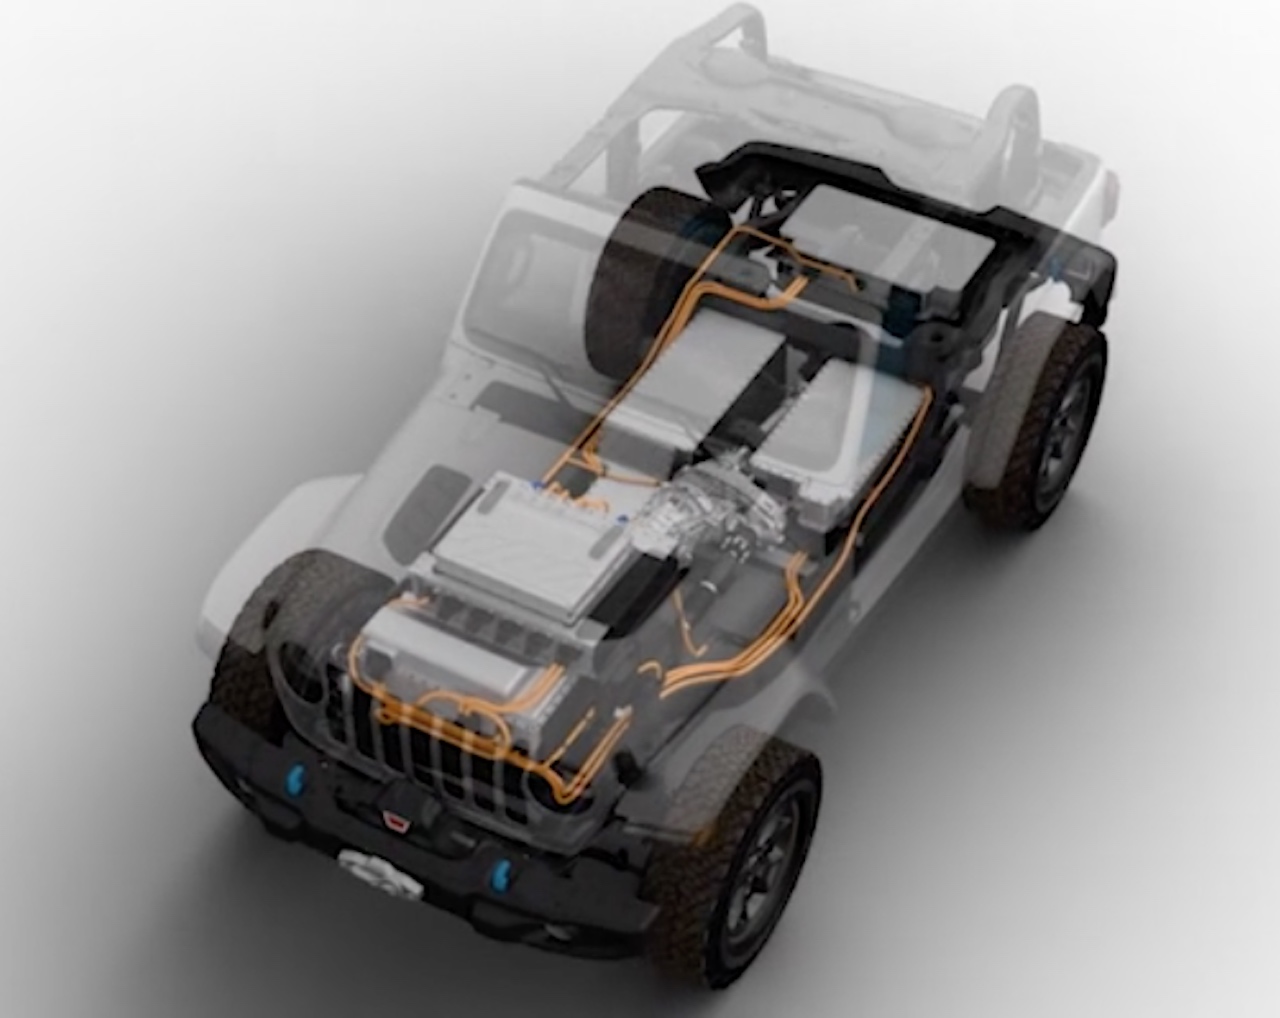 This Electric Jeep Wrangler concept will be the brands first electric vehicle when it debuts next month.